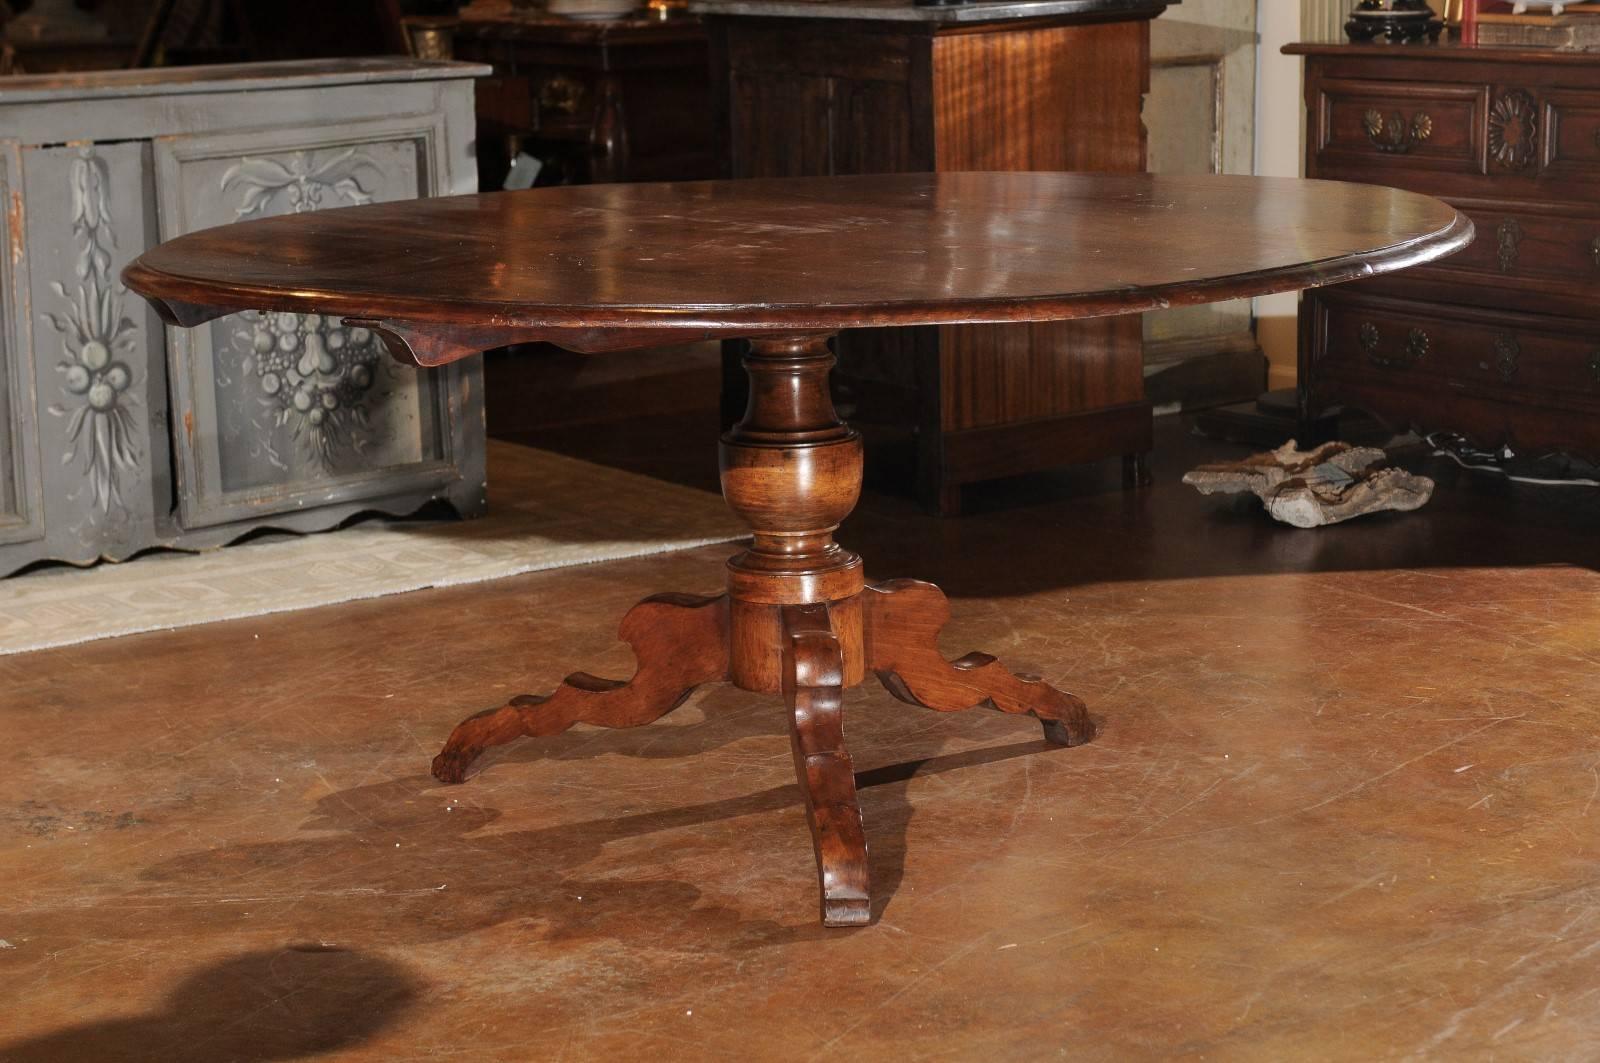 An Italian walnut dining room table with round top and pedestal base from the second half of the 19th century. This Italian pedestal table features a circular top with rounded edge, sitting above a turned pedestal base, raised on tripod legs. The